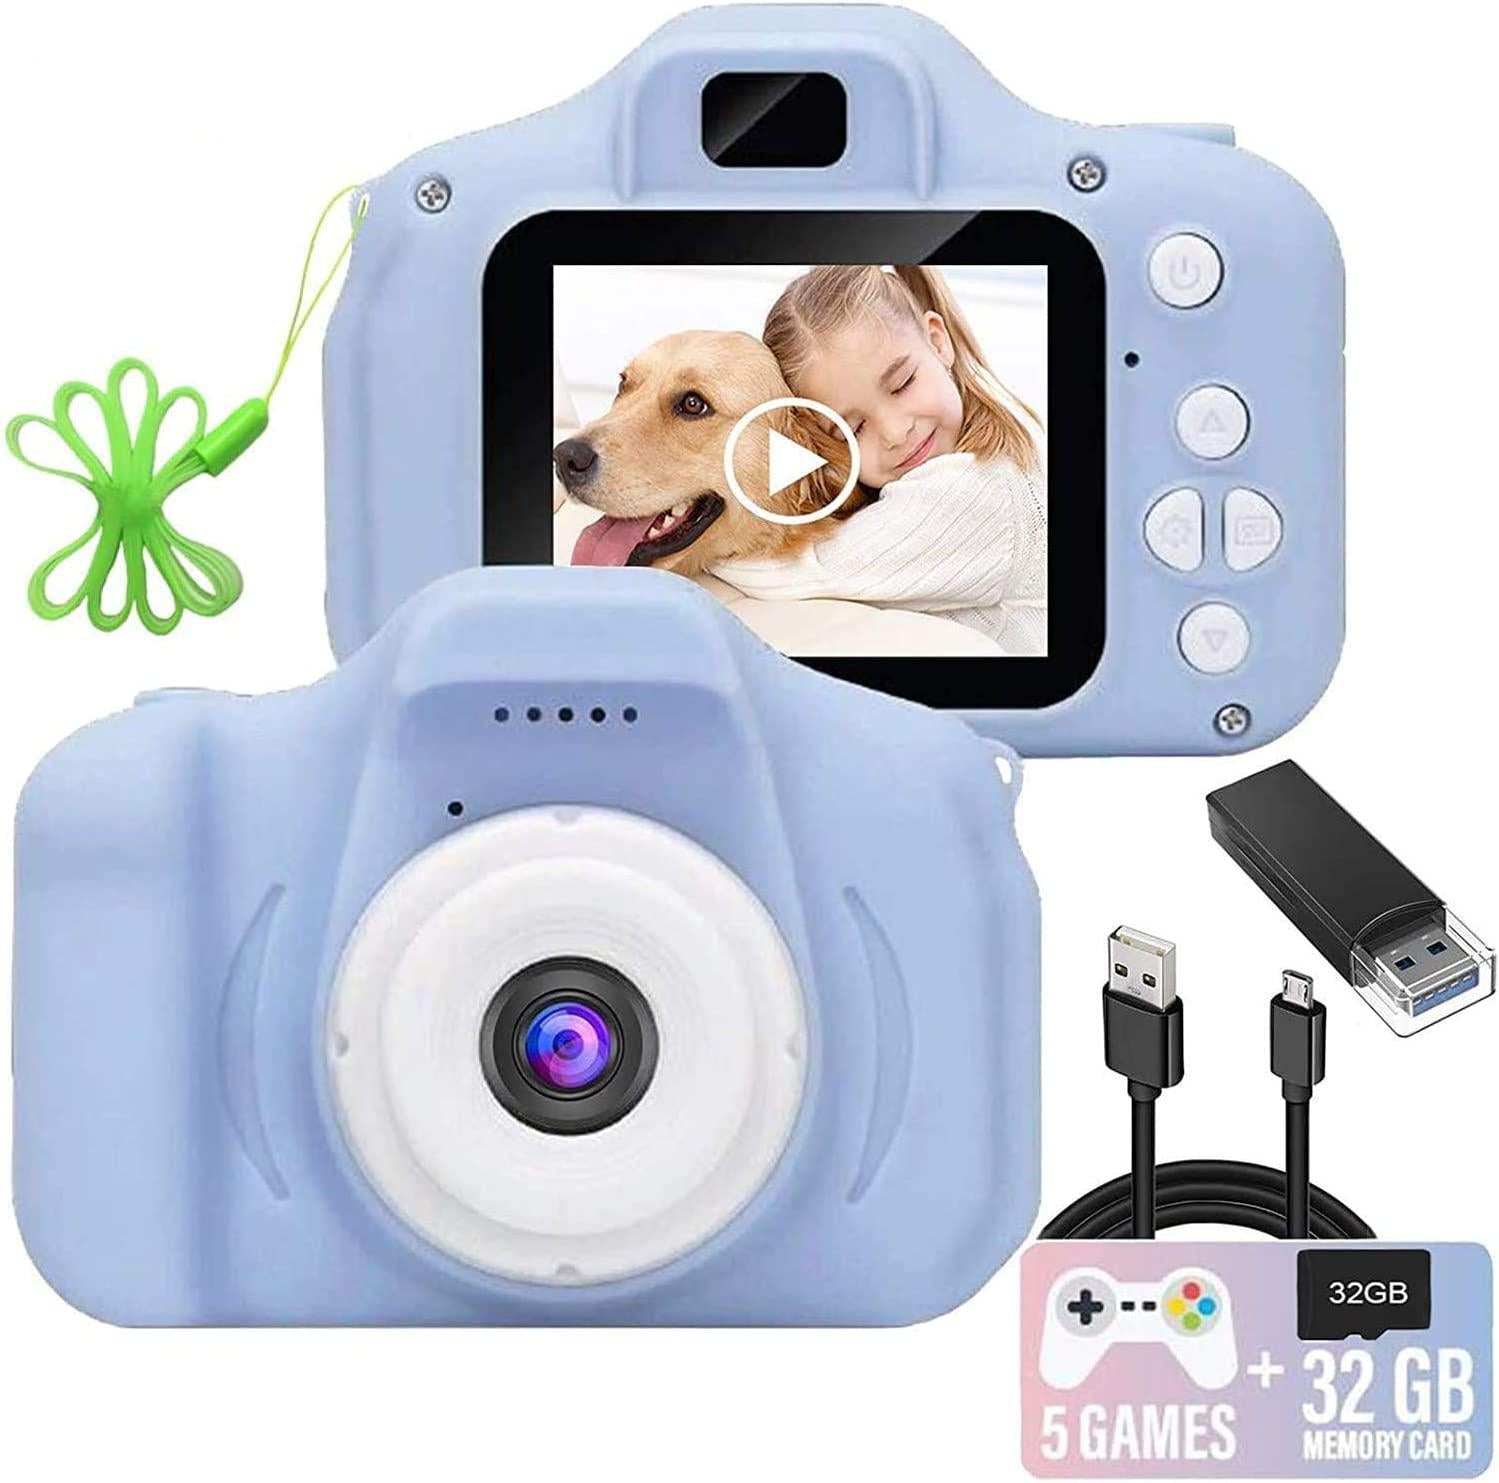 Suibety, Kids Camera, 8.0 MP FHD Digital Video Recorder Shockproof Action Cameras with 2 Inch IPS Screen and 32GB SD Card for Girls Boys Gifts Blue